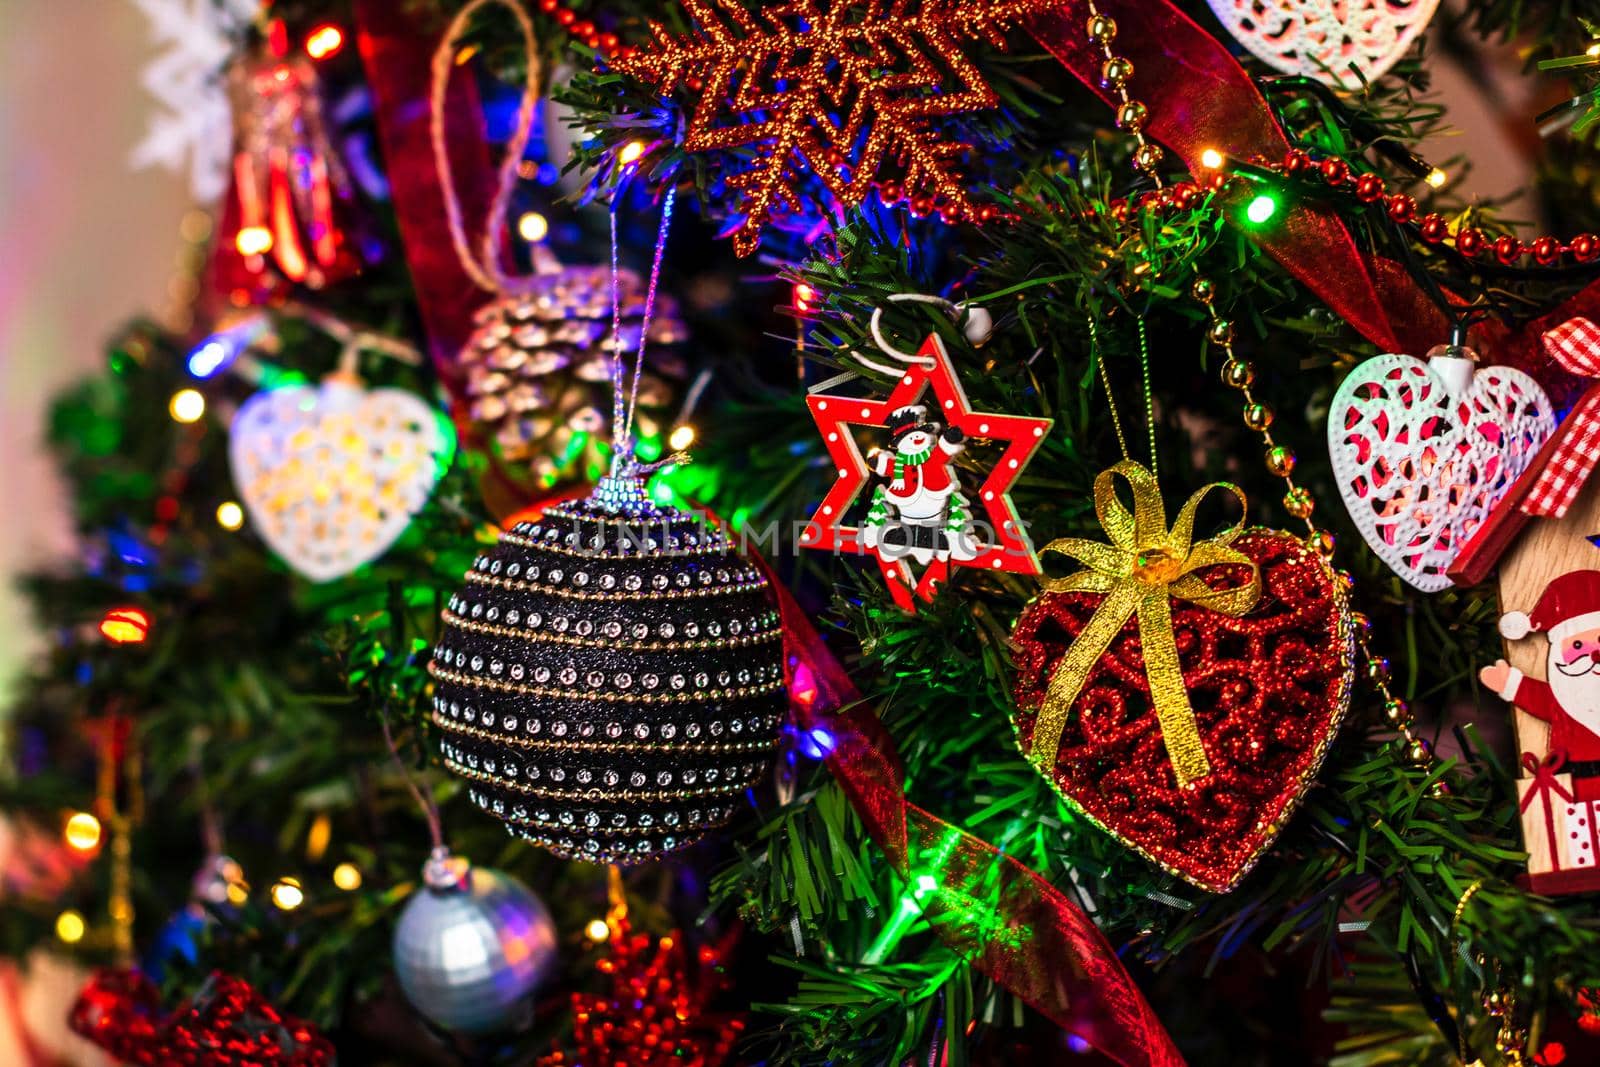 Beautiful Christmas ornaments and lights hanging in the Christmas tree by vladispas